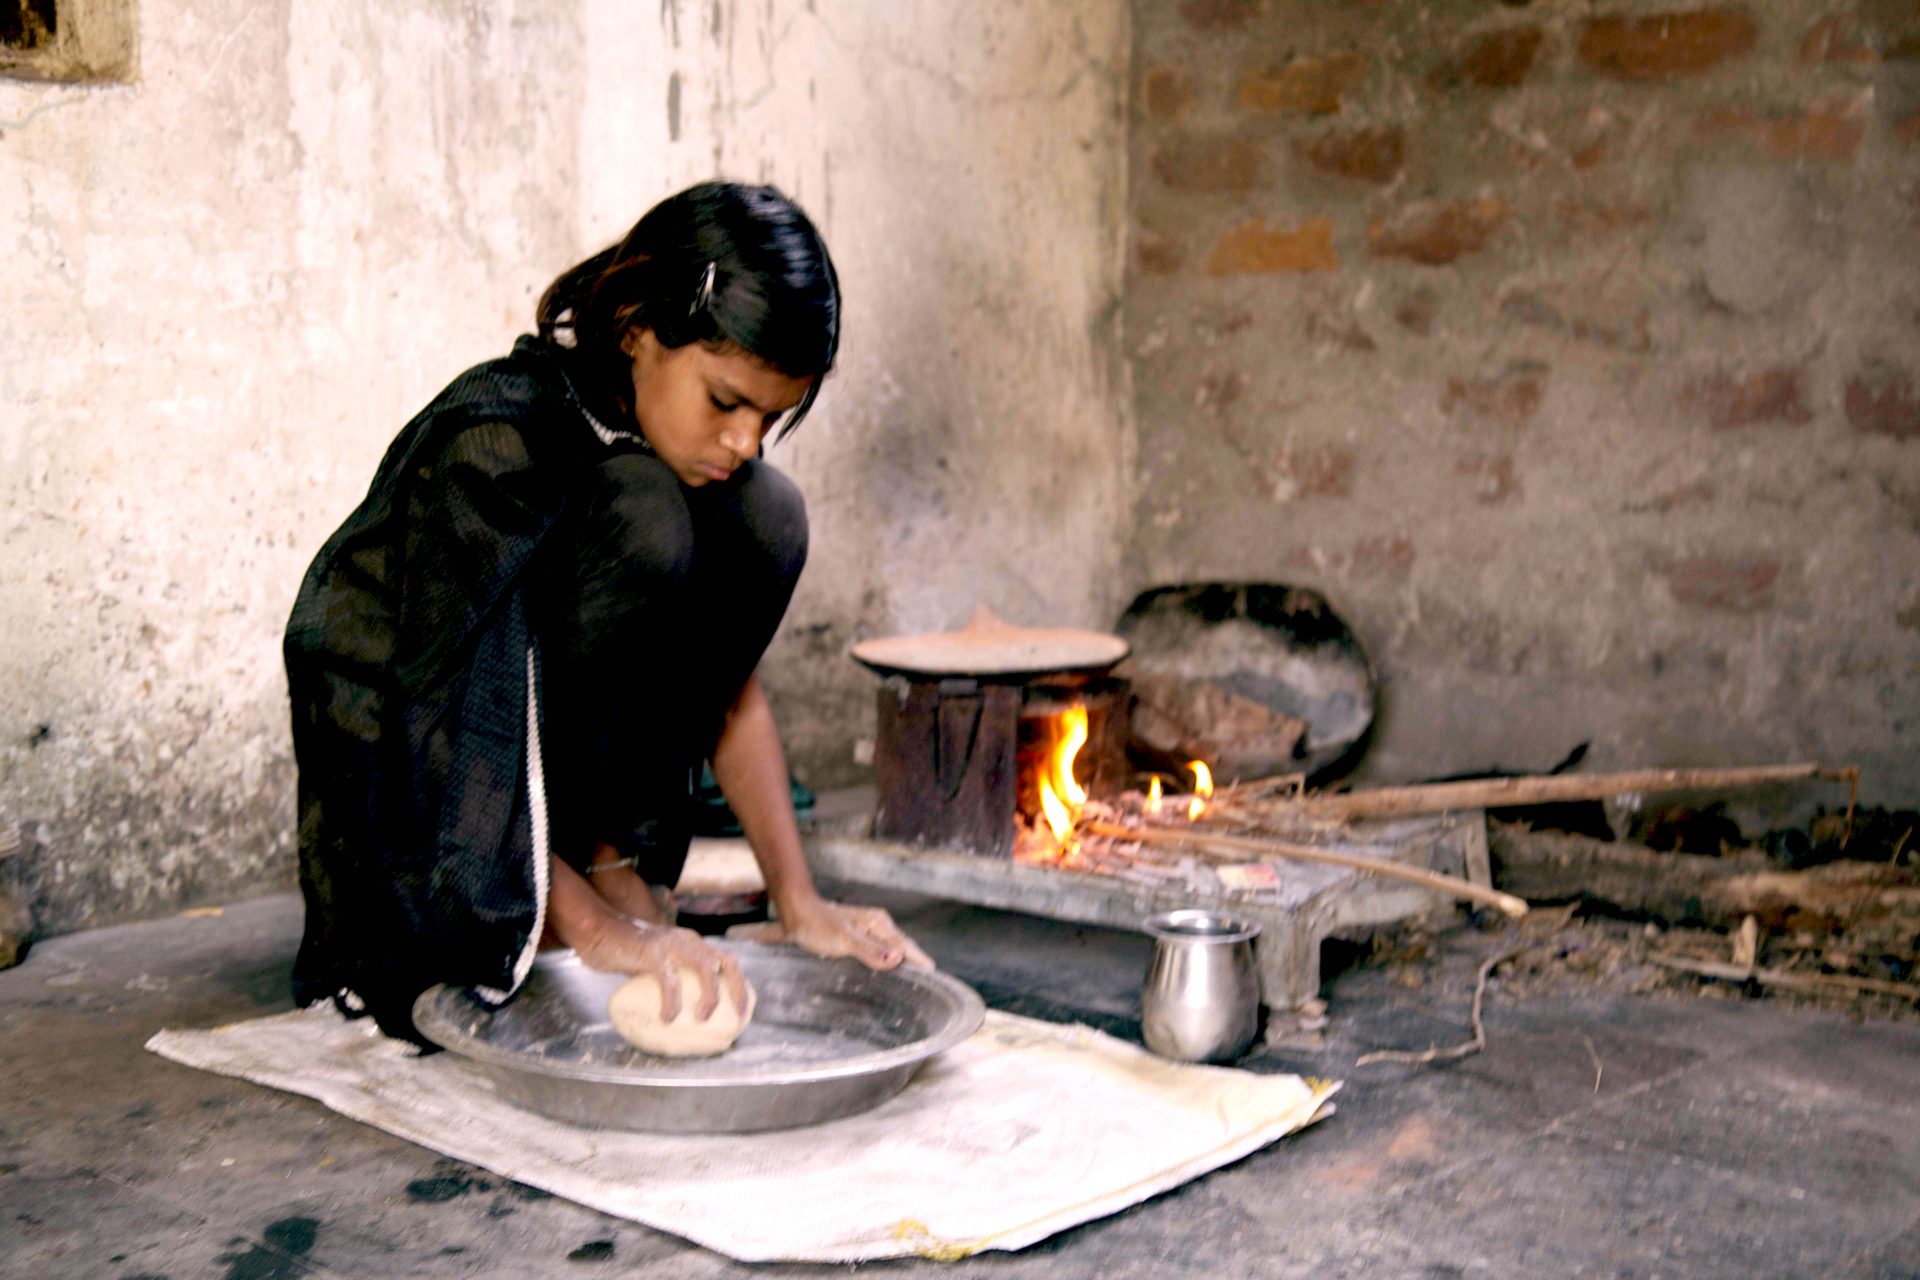 Invisible Child Labour: An Extension Of Gendered Labour In Rural India